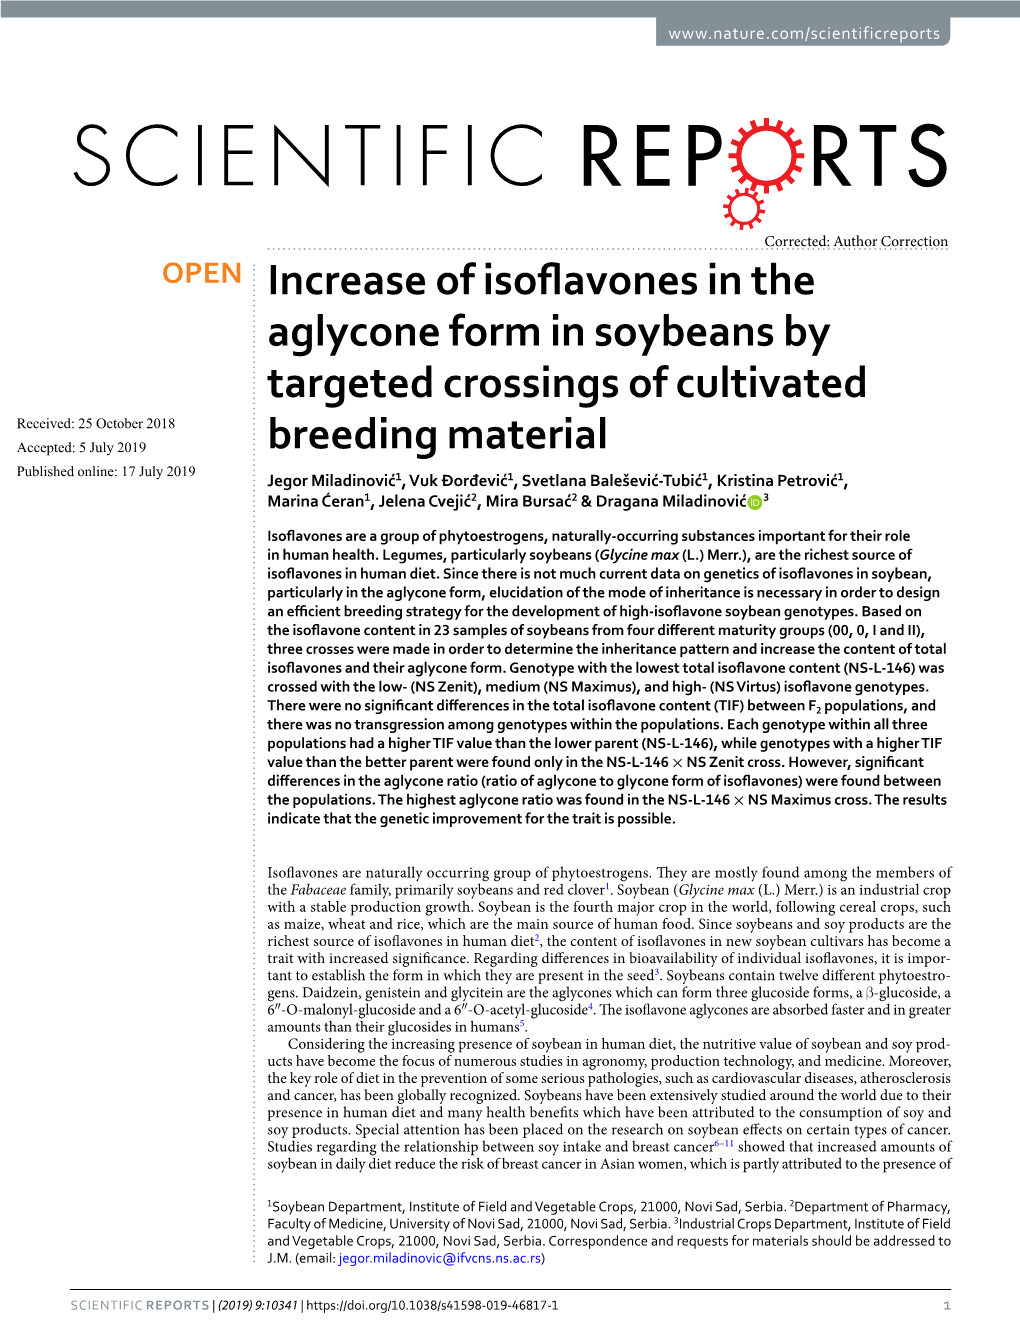 Increase of Isoflavones in the Aglycone Form in Soybeans